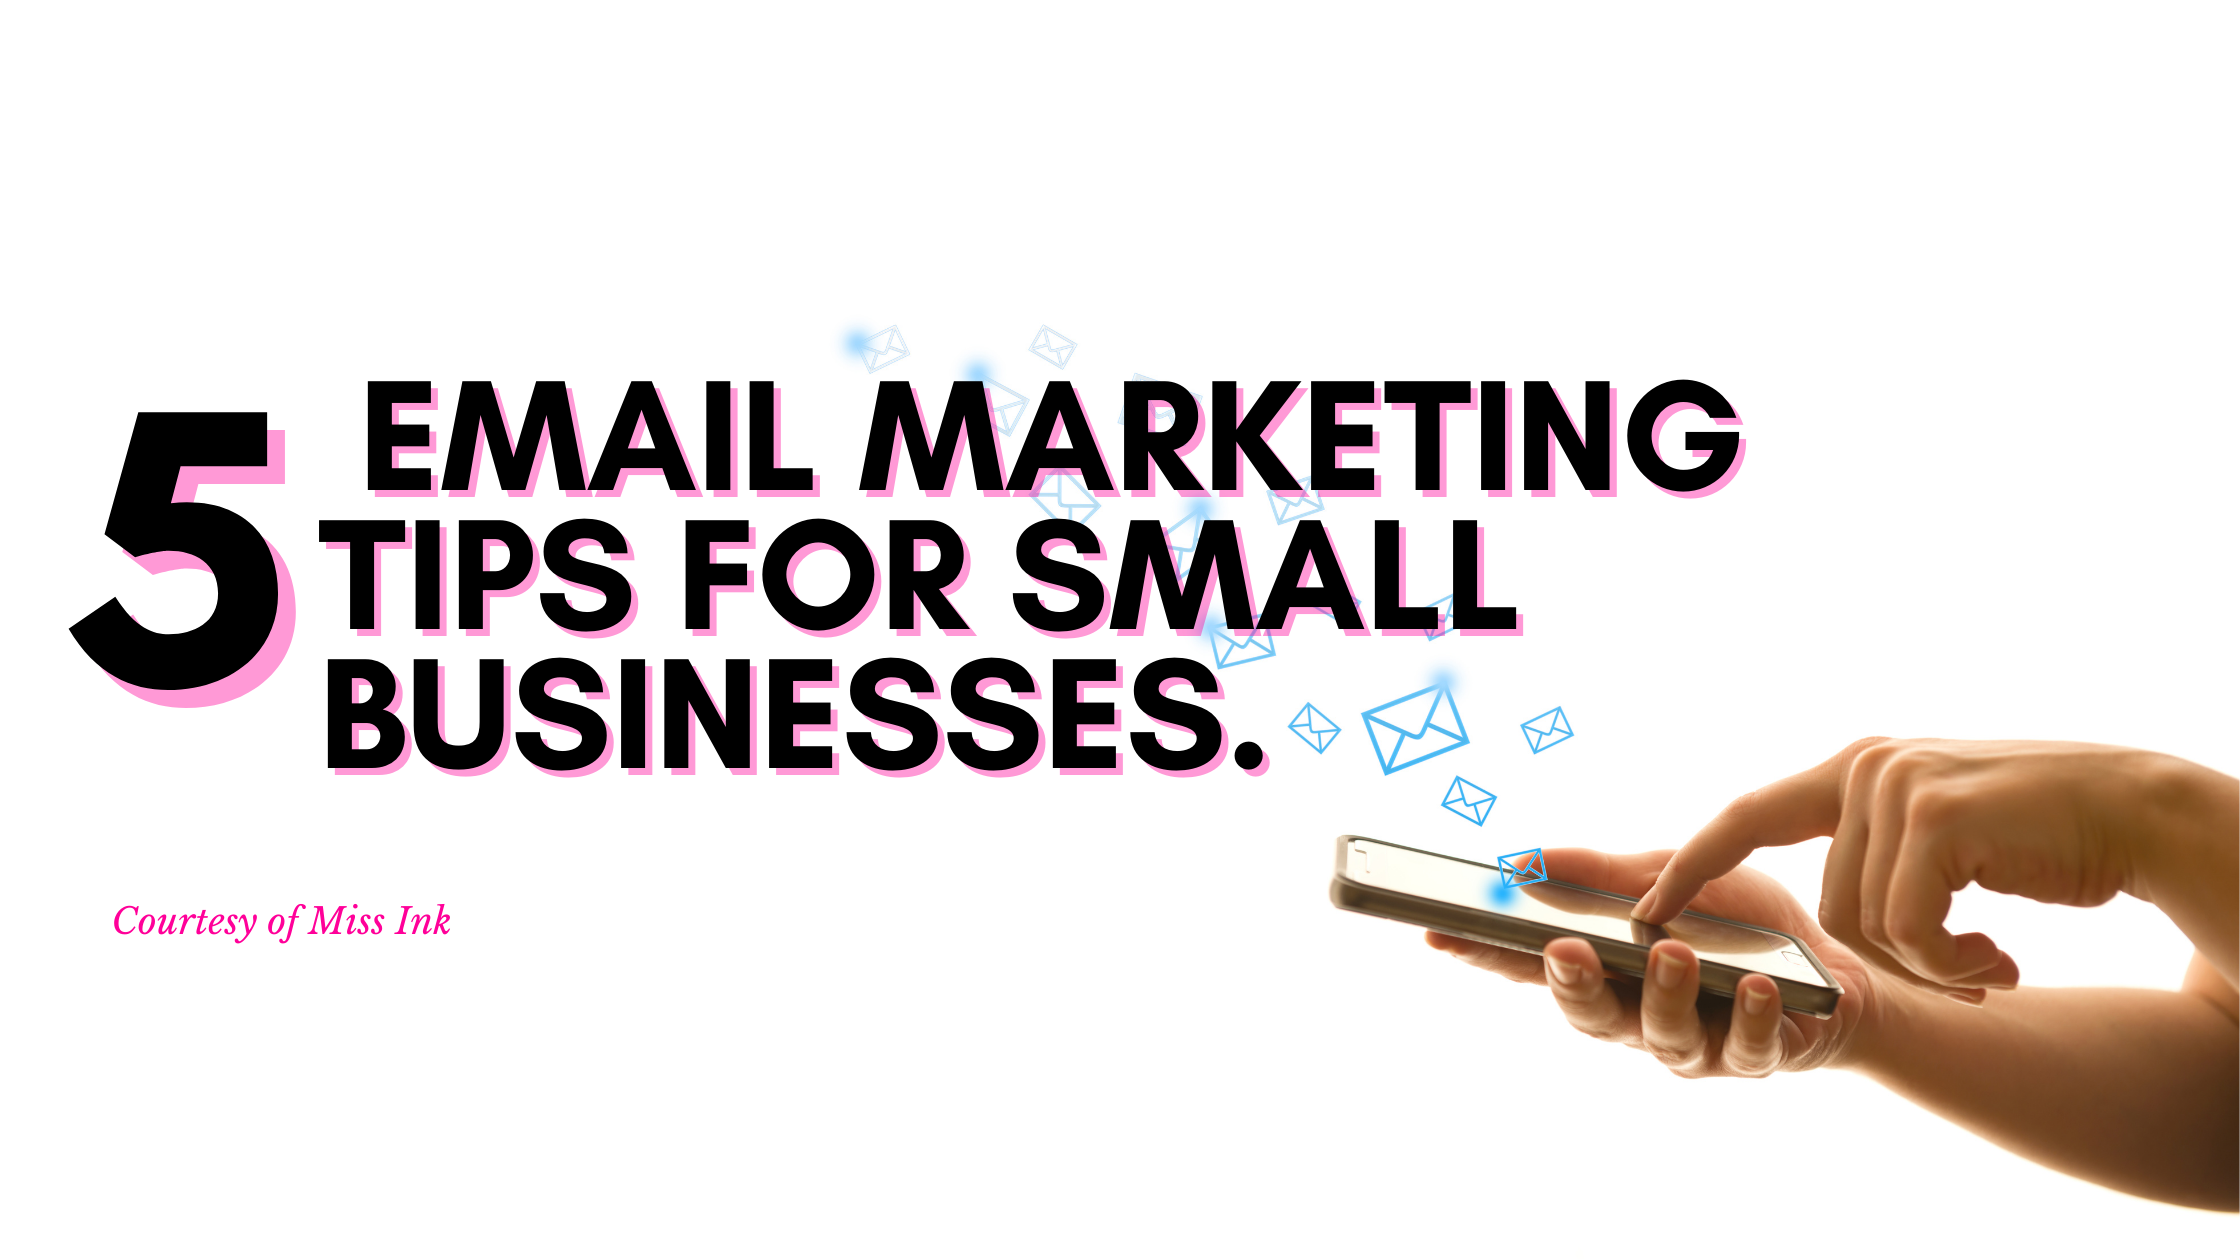 5 Email Marketing Tips For Small Businesses.